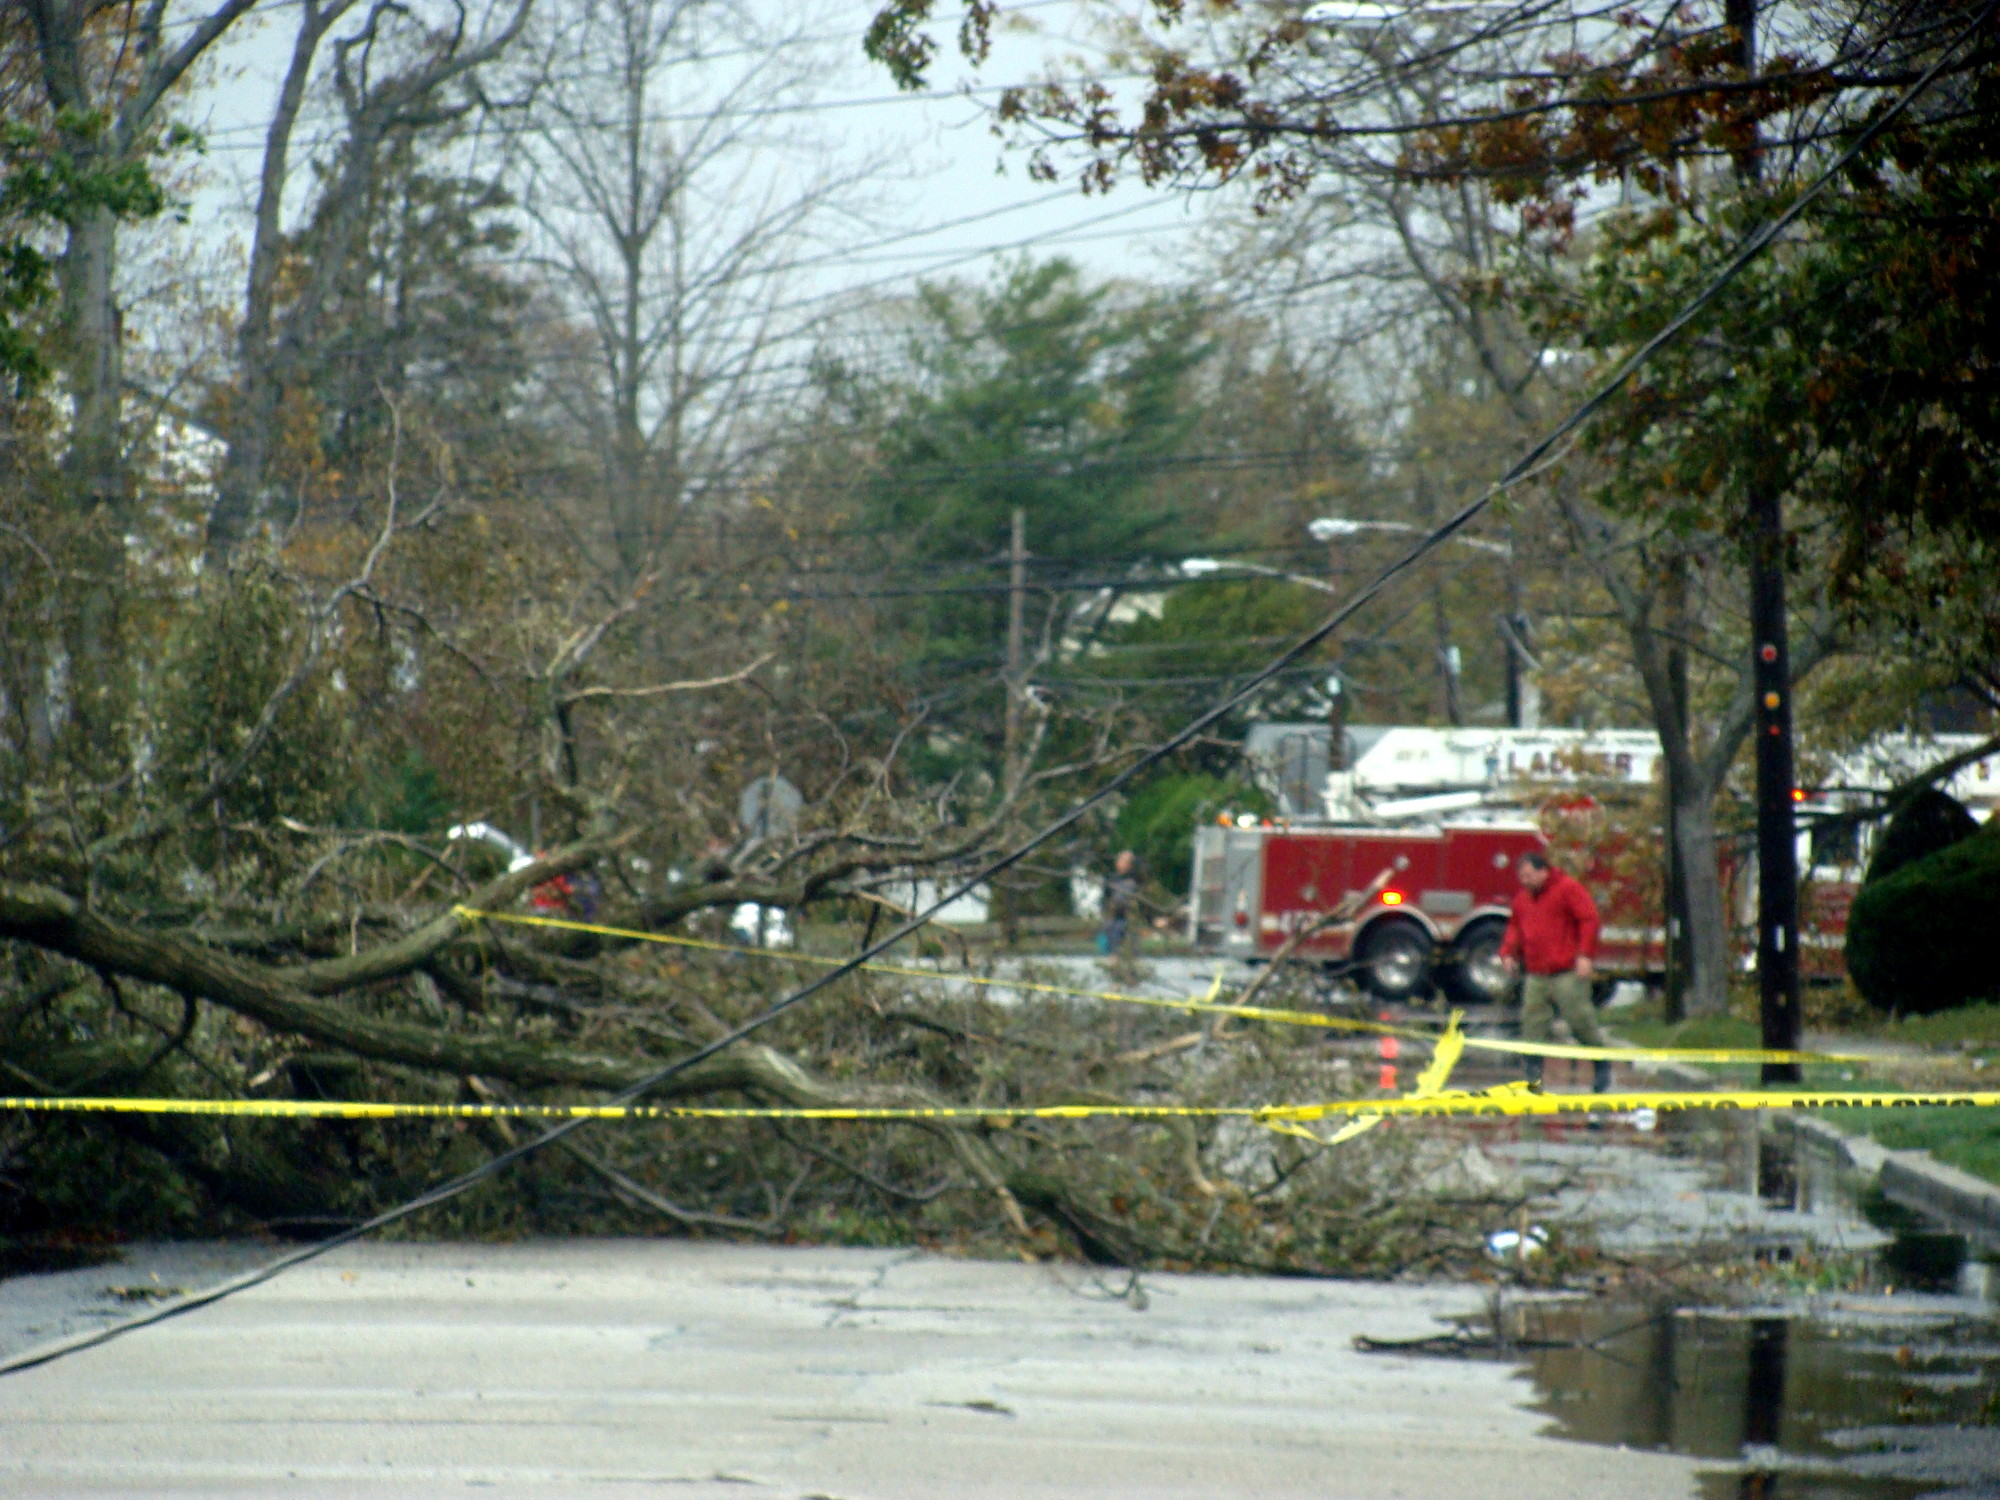 Downed electrical wires were a major problem for LIPA and residents after the storm.